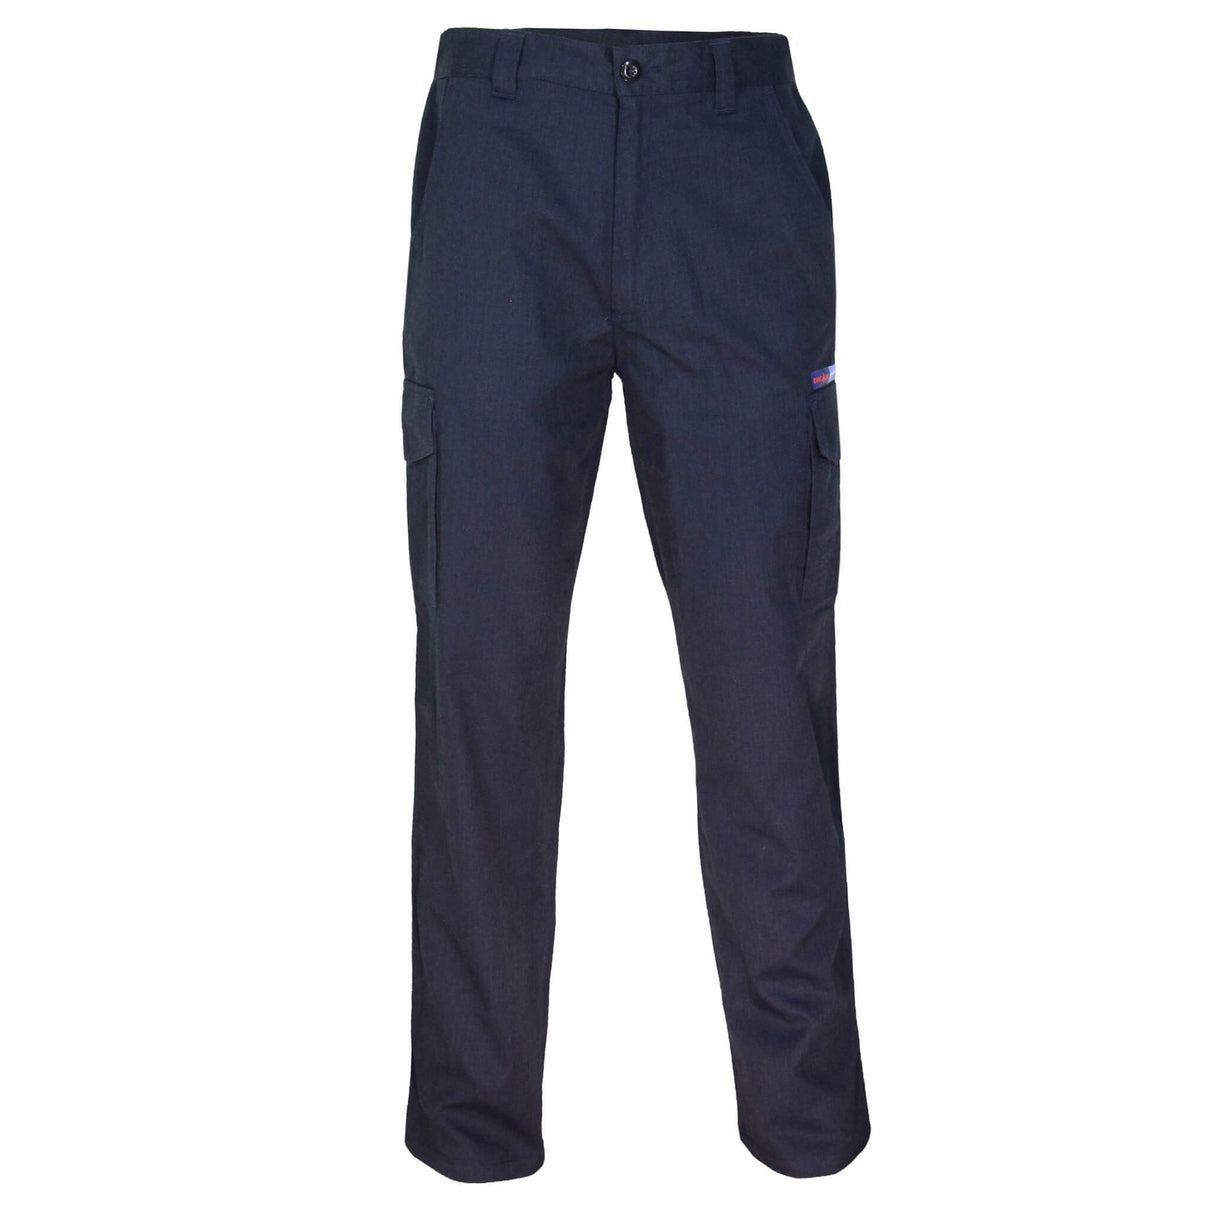 3473 - Inherent FR PPE2 Cargo Pants